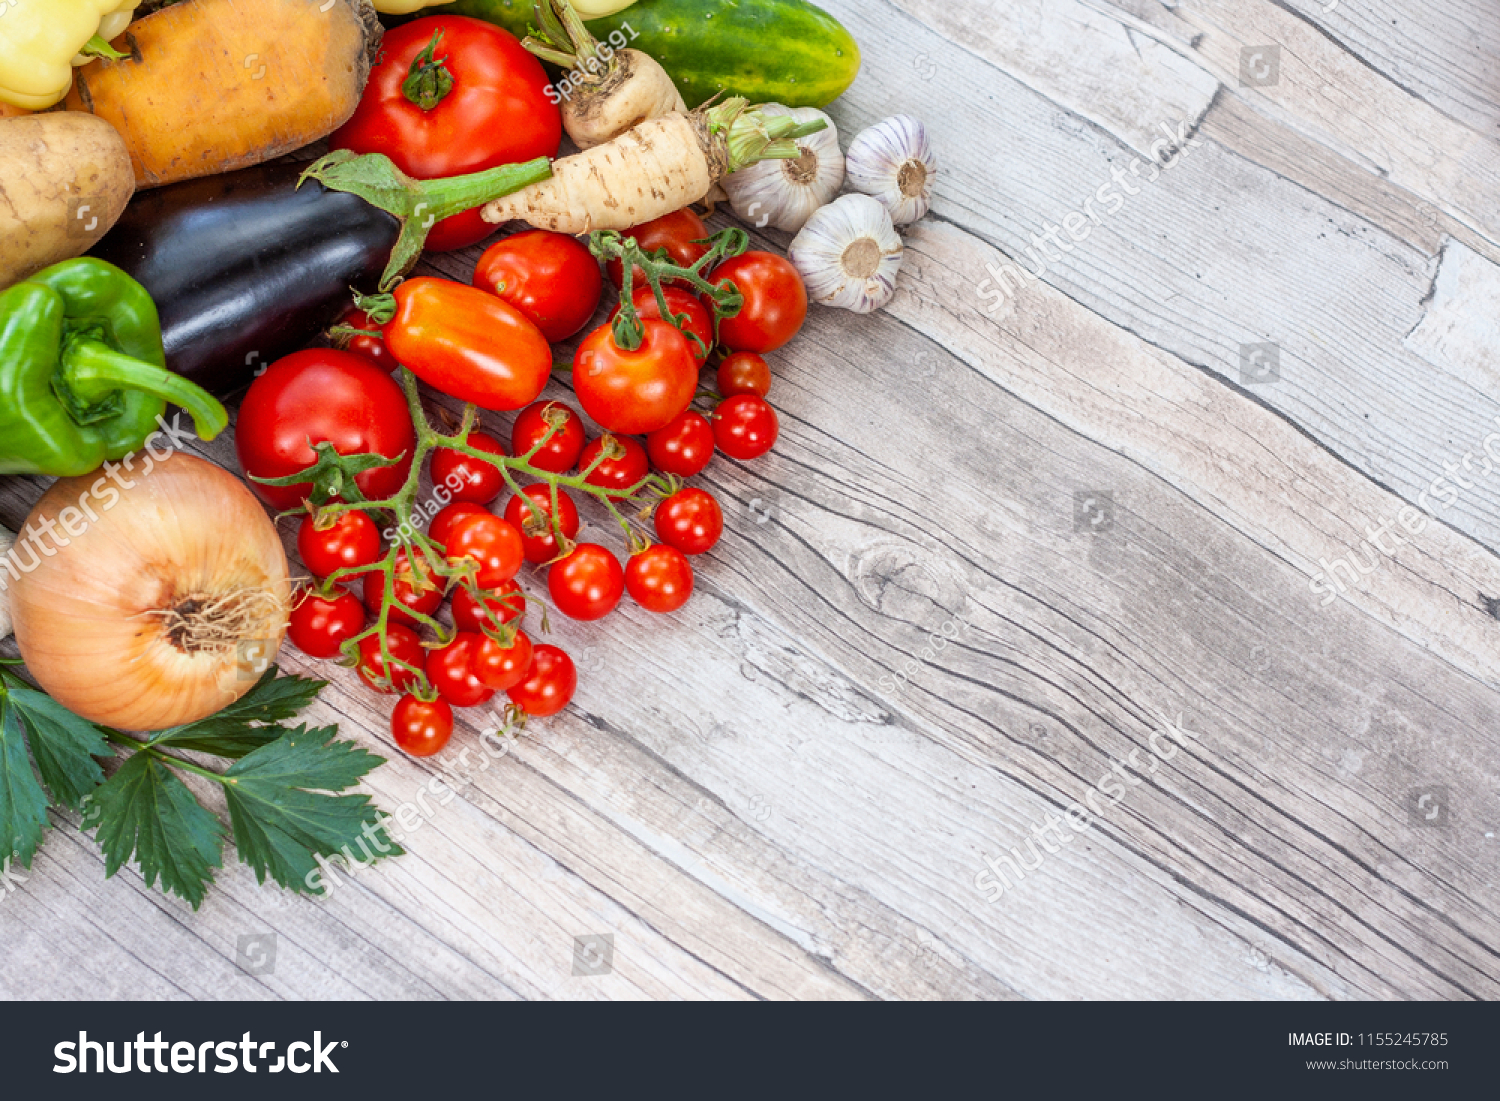 Colourful variety of fresh home grown vegetables from an organic garden on a wooden surface. Tomato, green and yellow bell peppers, carrot, parsley, onion, garlic, potato, eggplant and zucchini. #1155245785